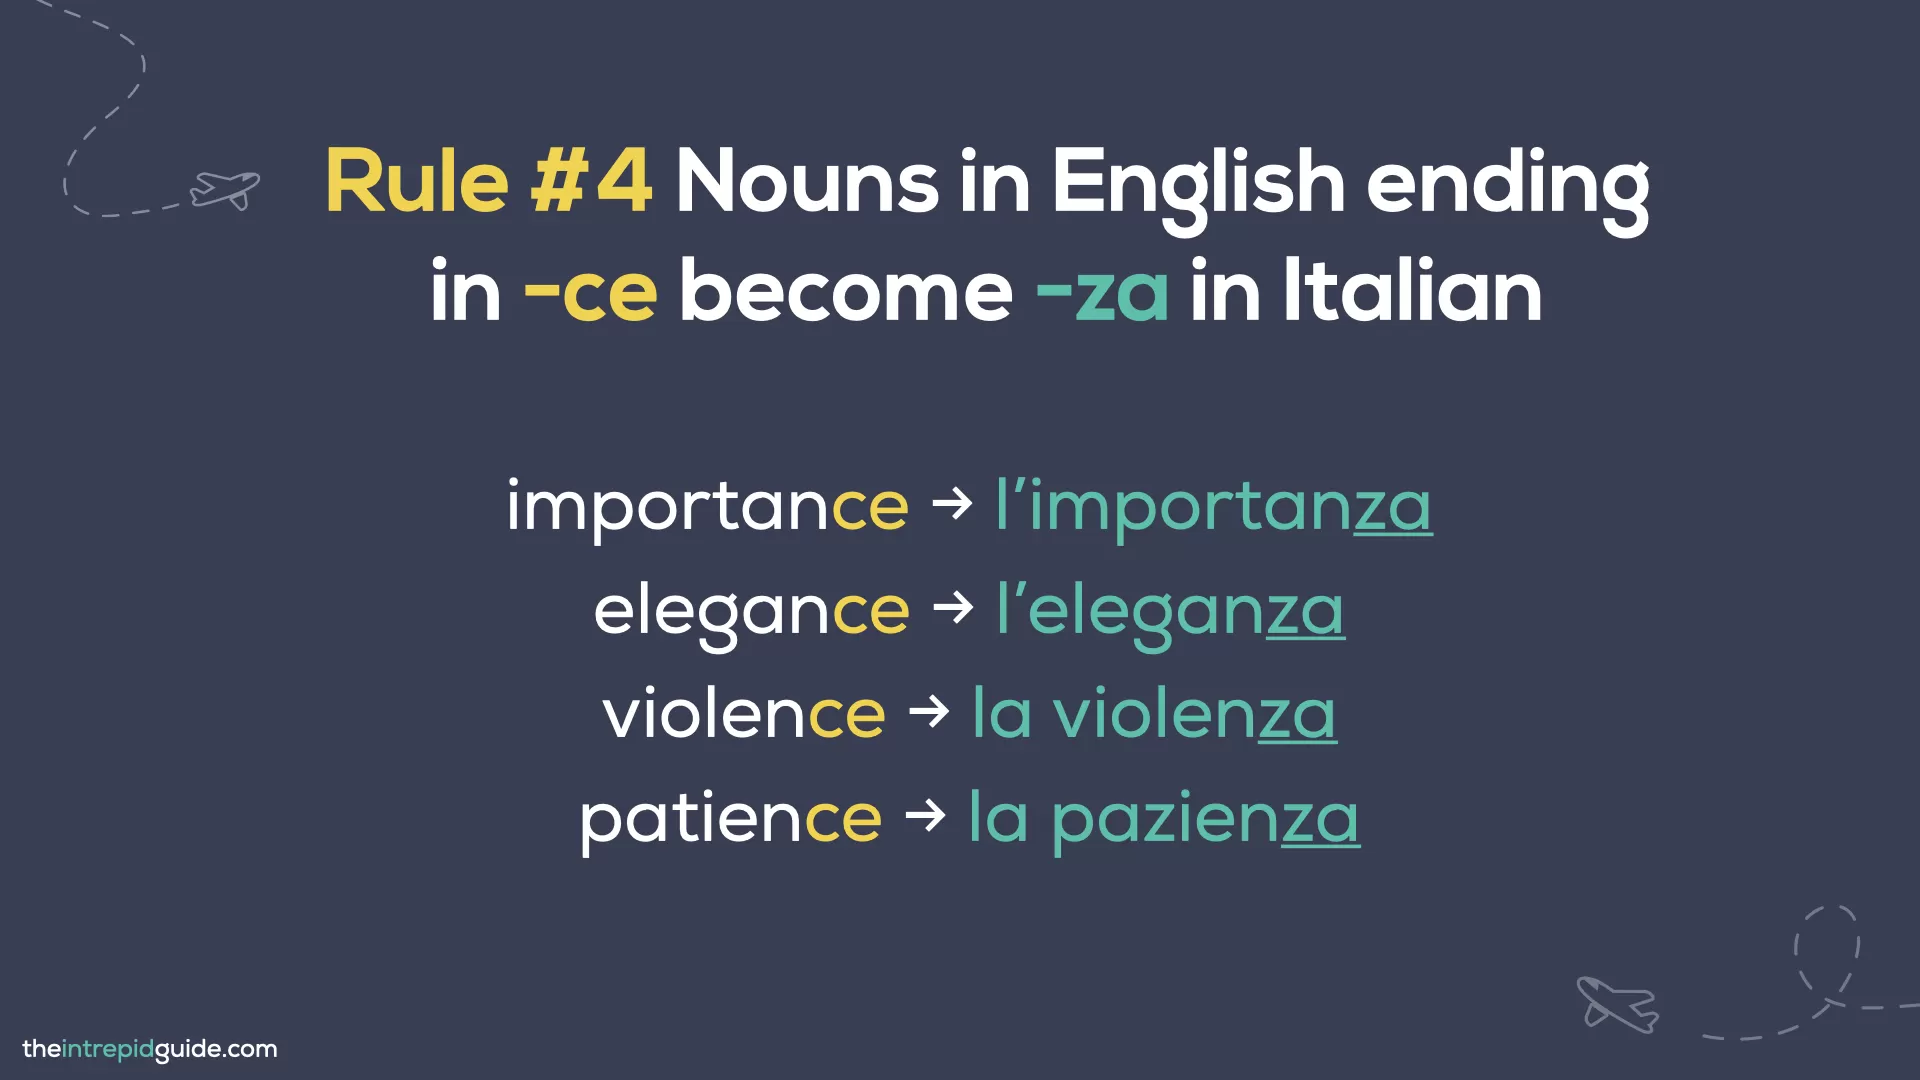 Italian cognates and loan words - Rule 4 - Nouns in English ending in -ce become -za in Italian